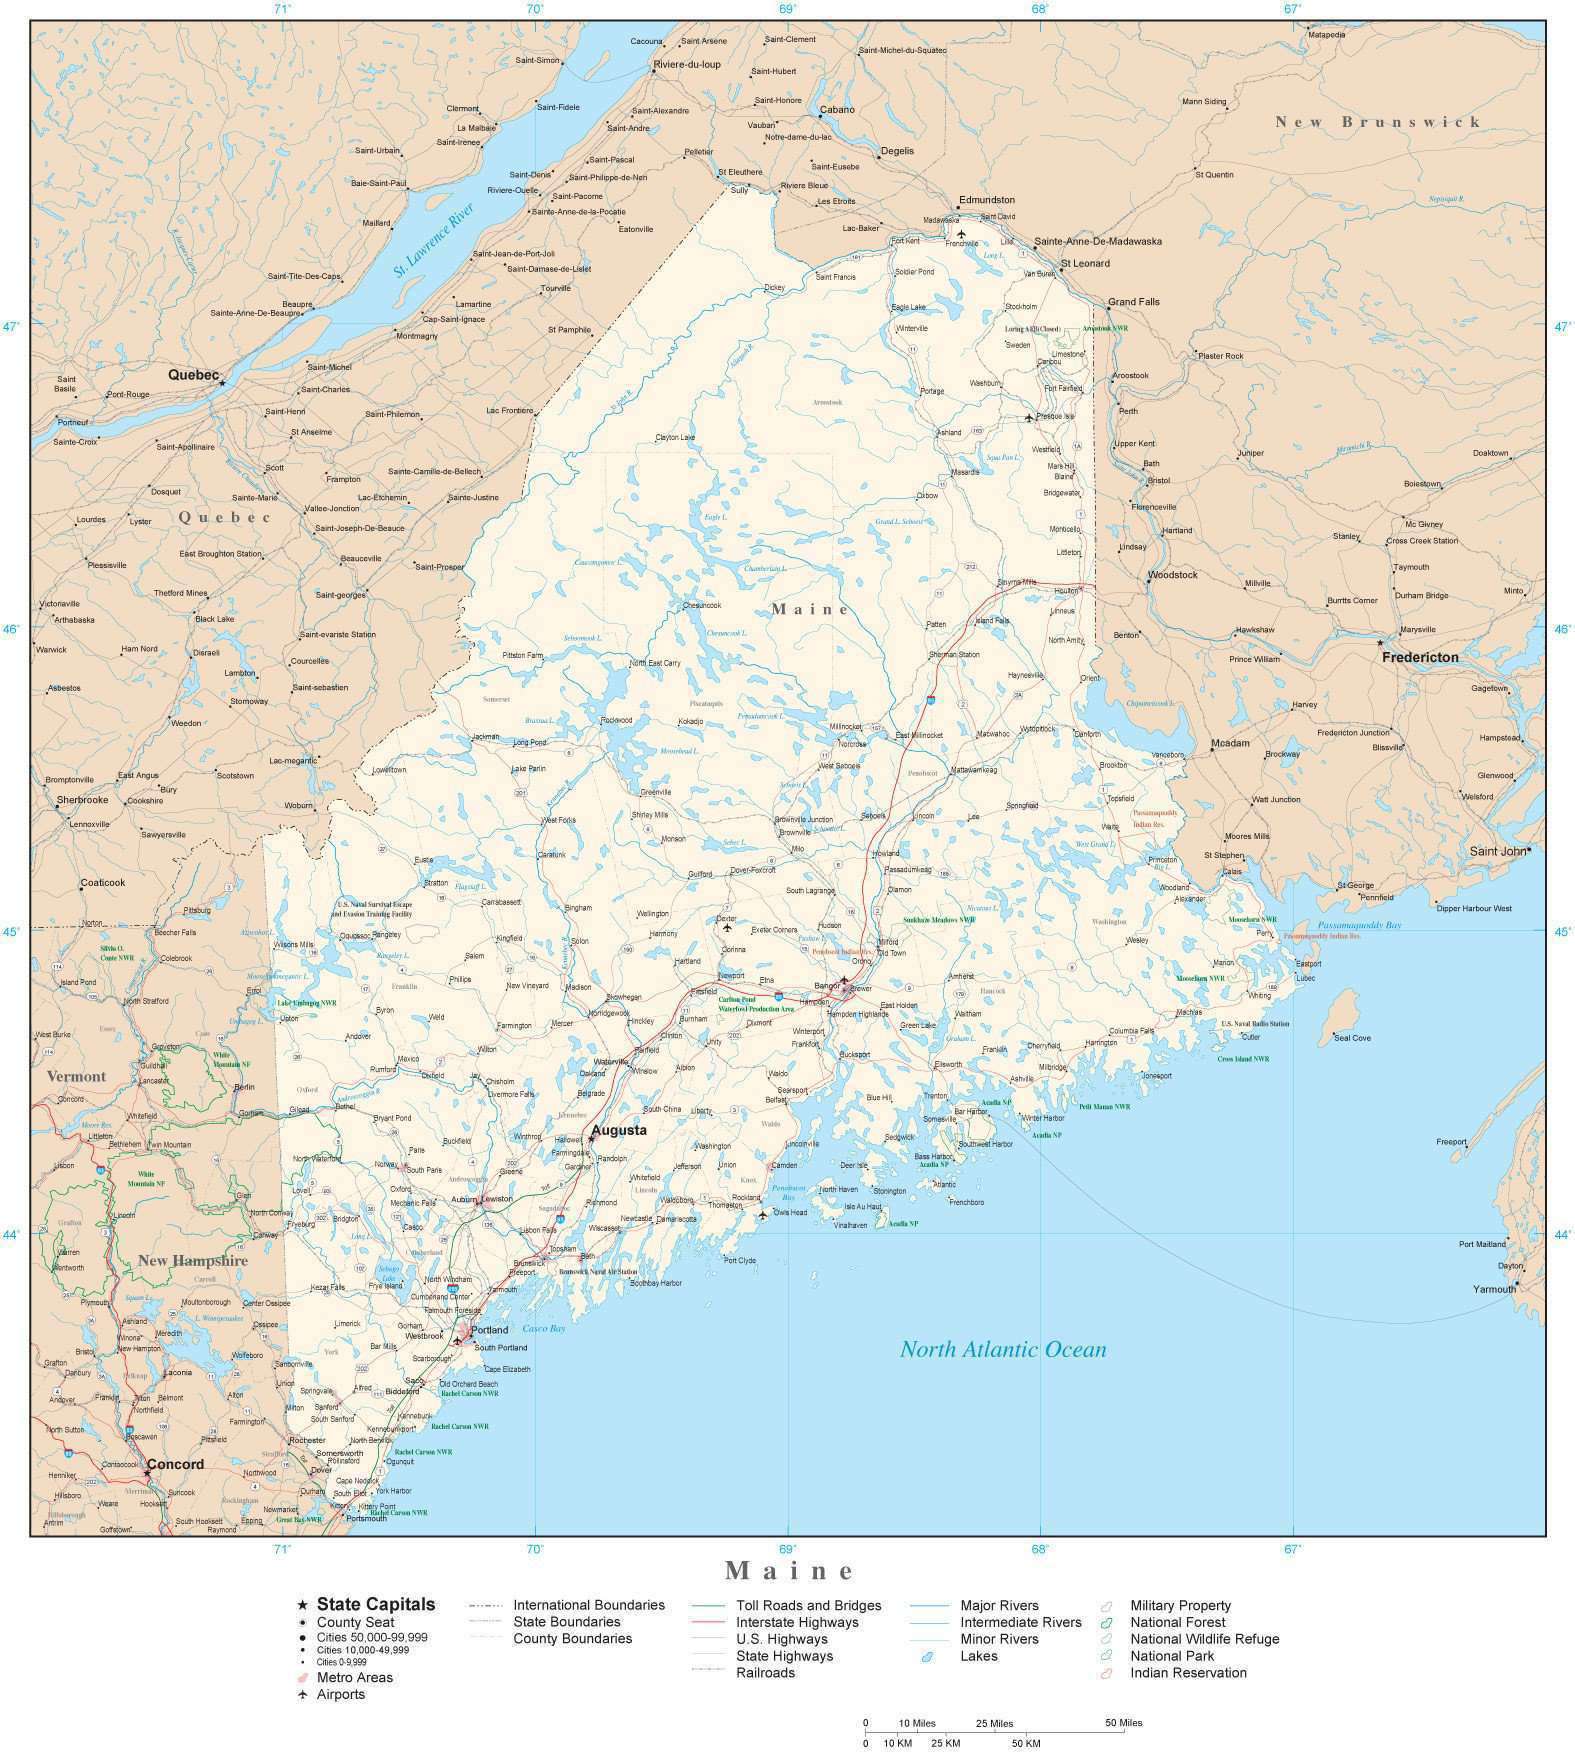 Maine Detailed Map in Adobe Illustrator vector format. Detailed